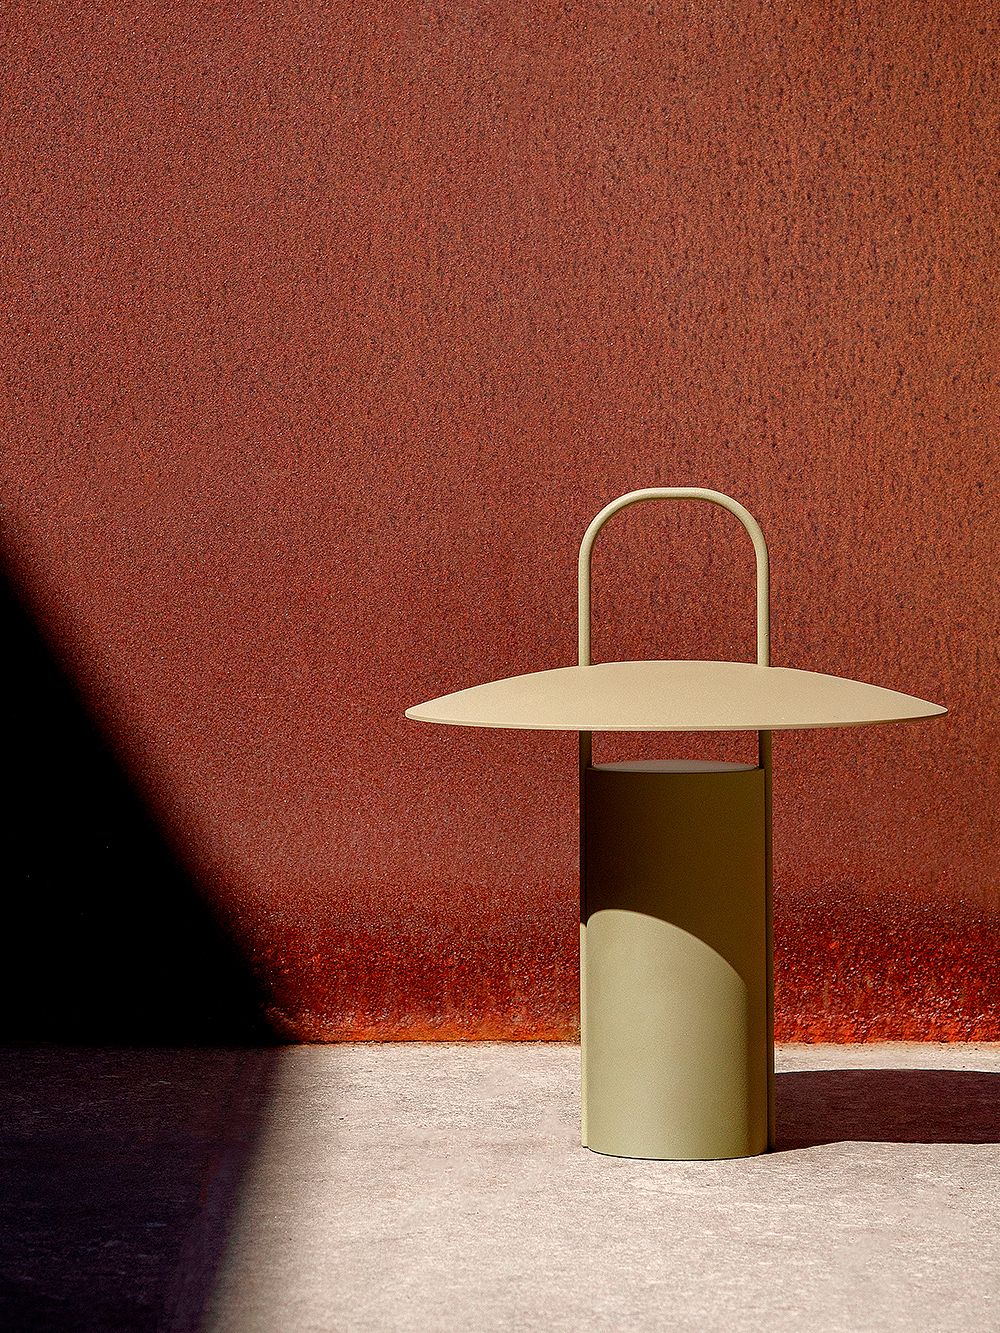 An image of Menu's dusty green Ray table lamp against a red background.